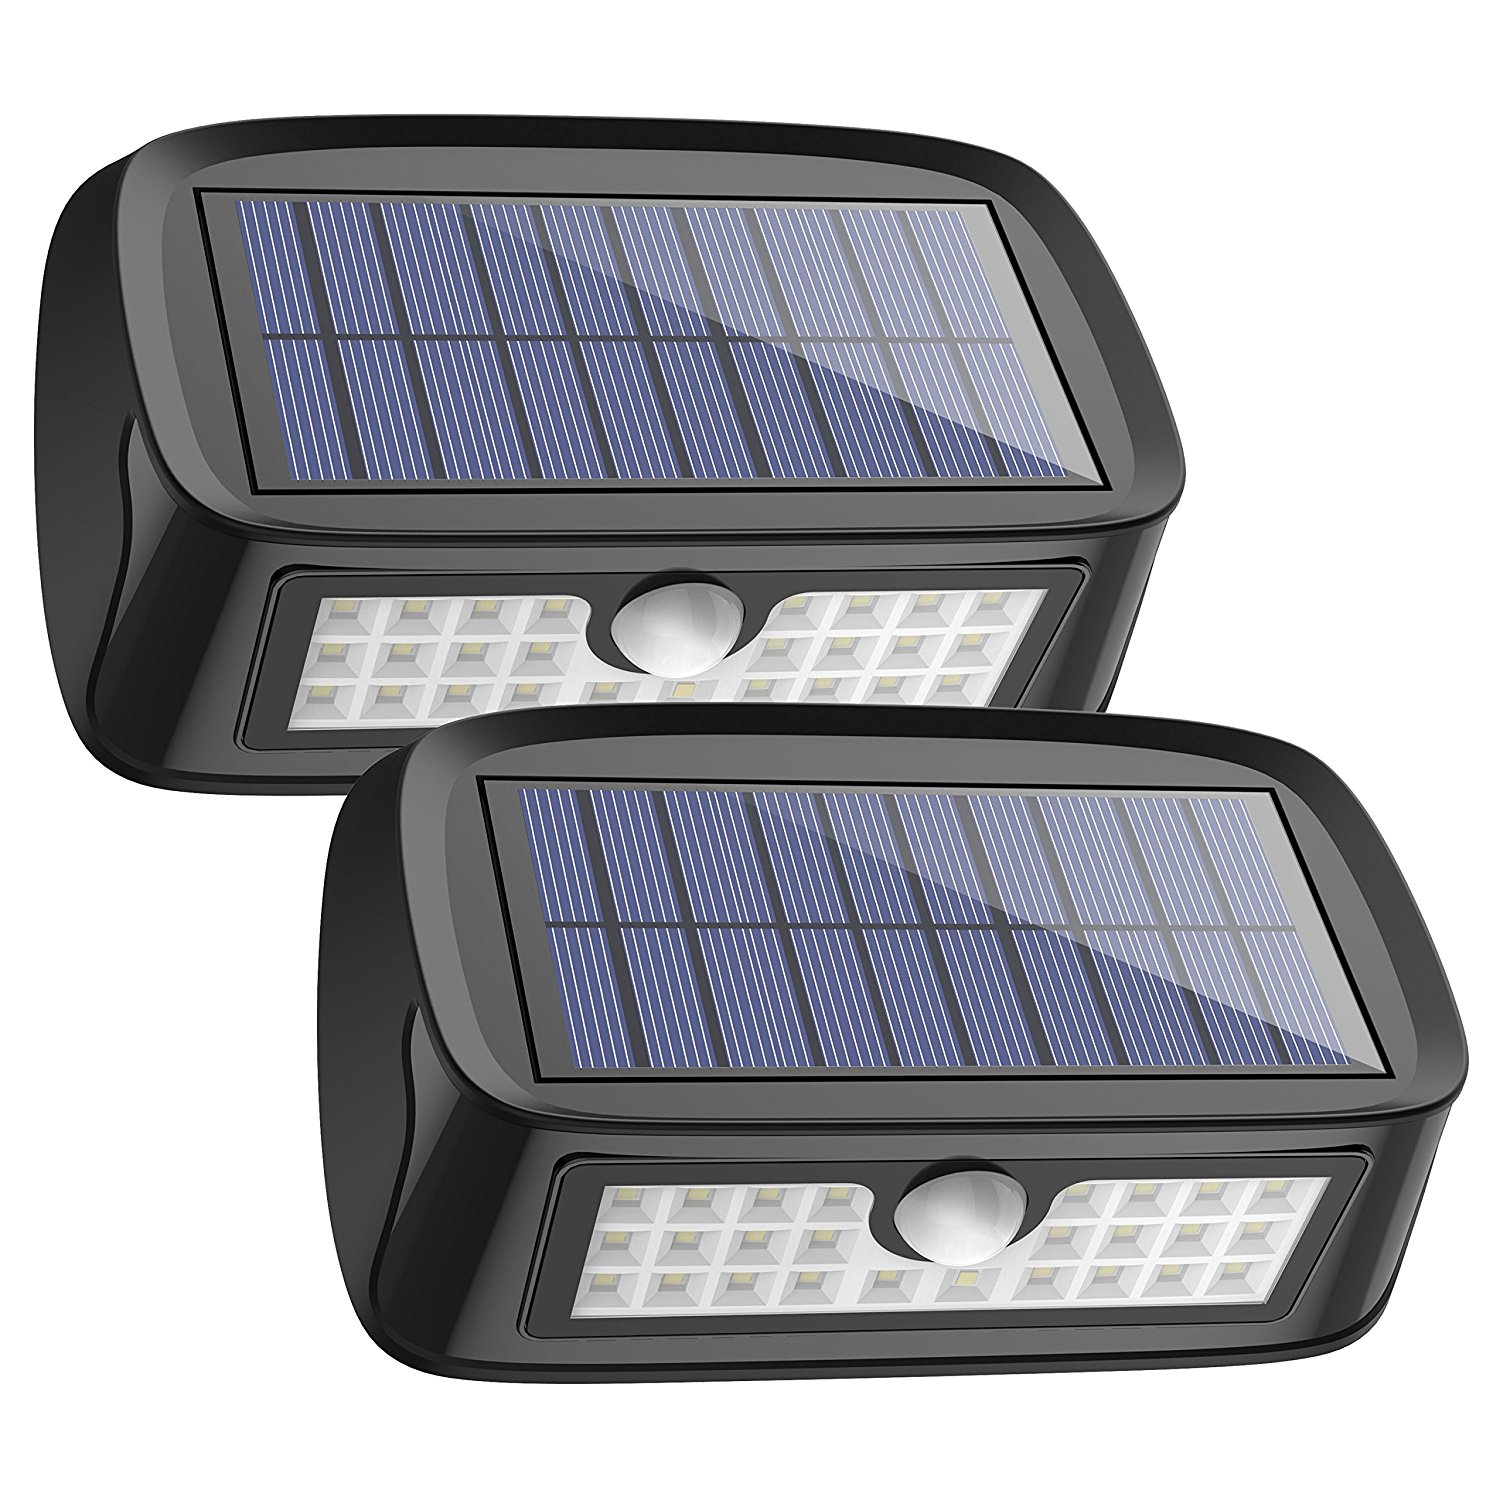 2-pack waterproof outdoor motion solar lights for $10